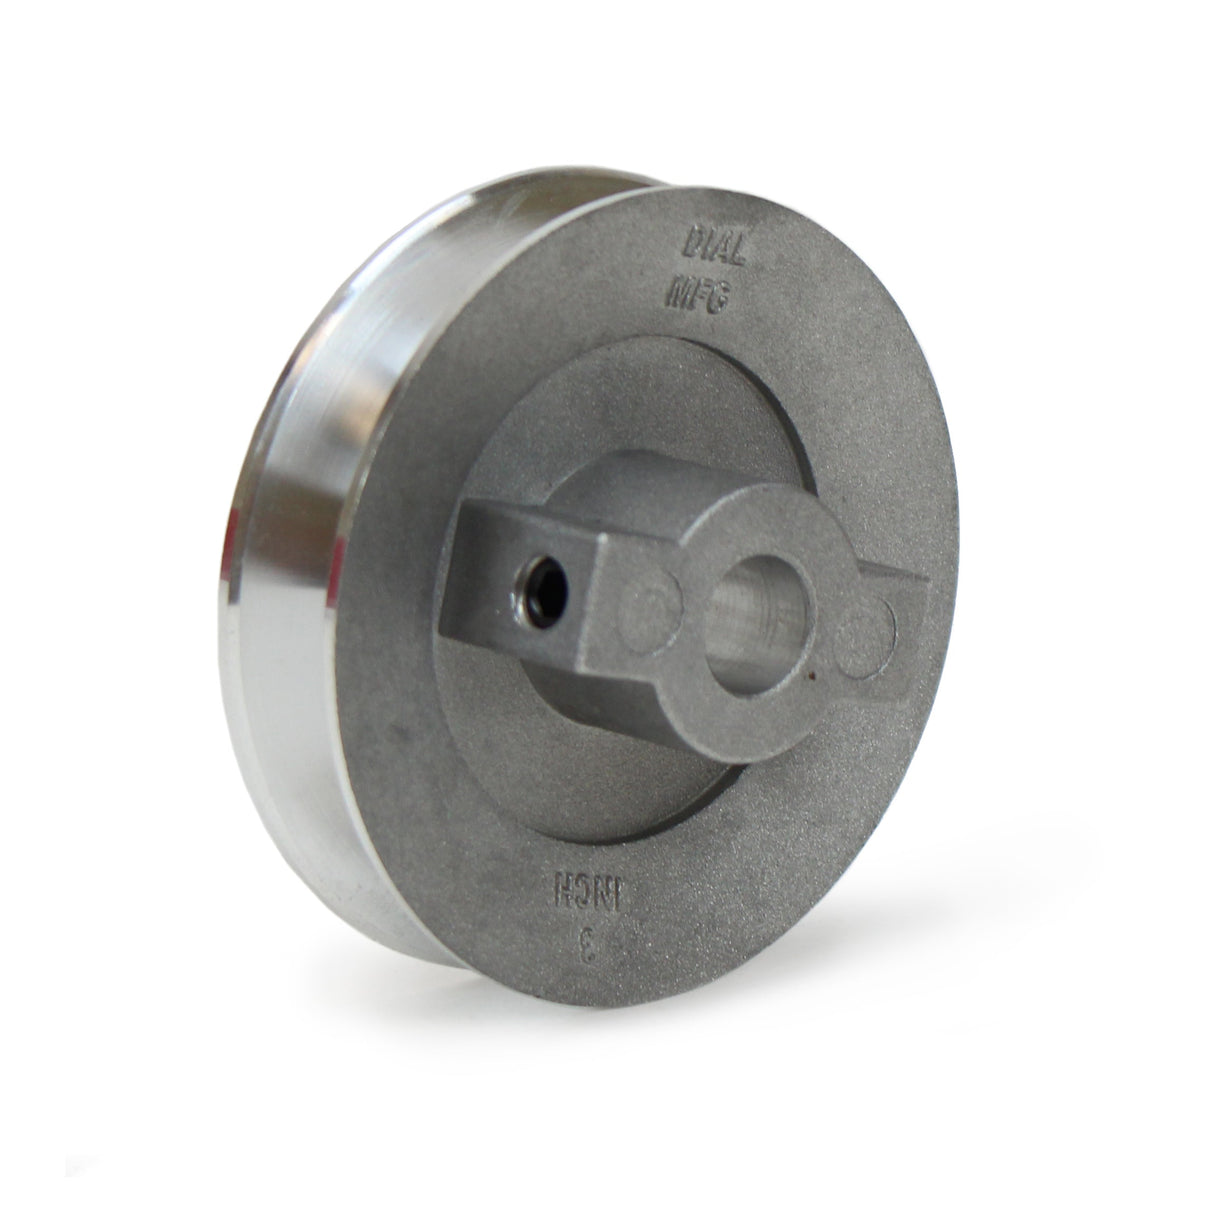 Dial ½ HP Fixed Motor Pulley (2-3/4″ x 1/2″)